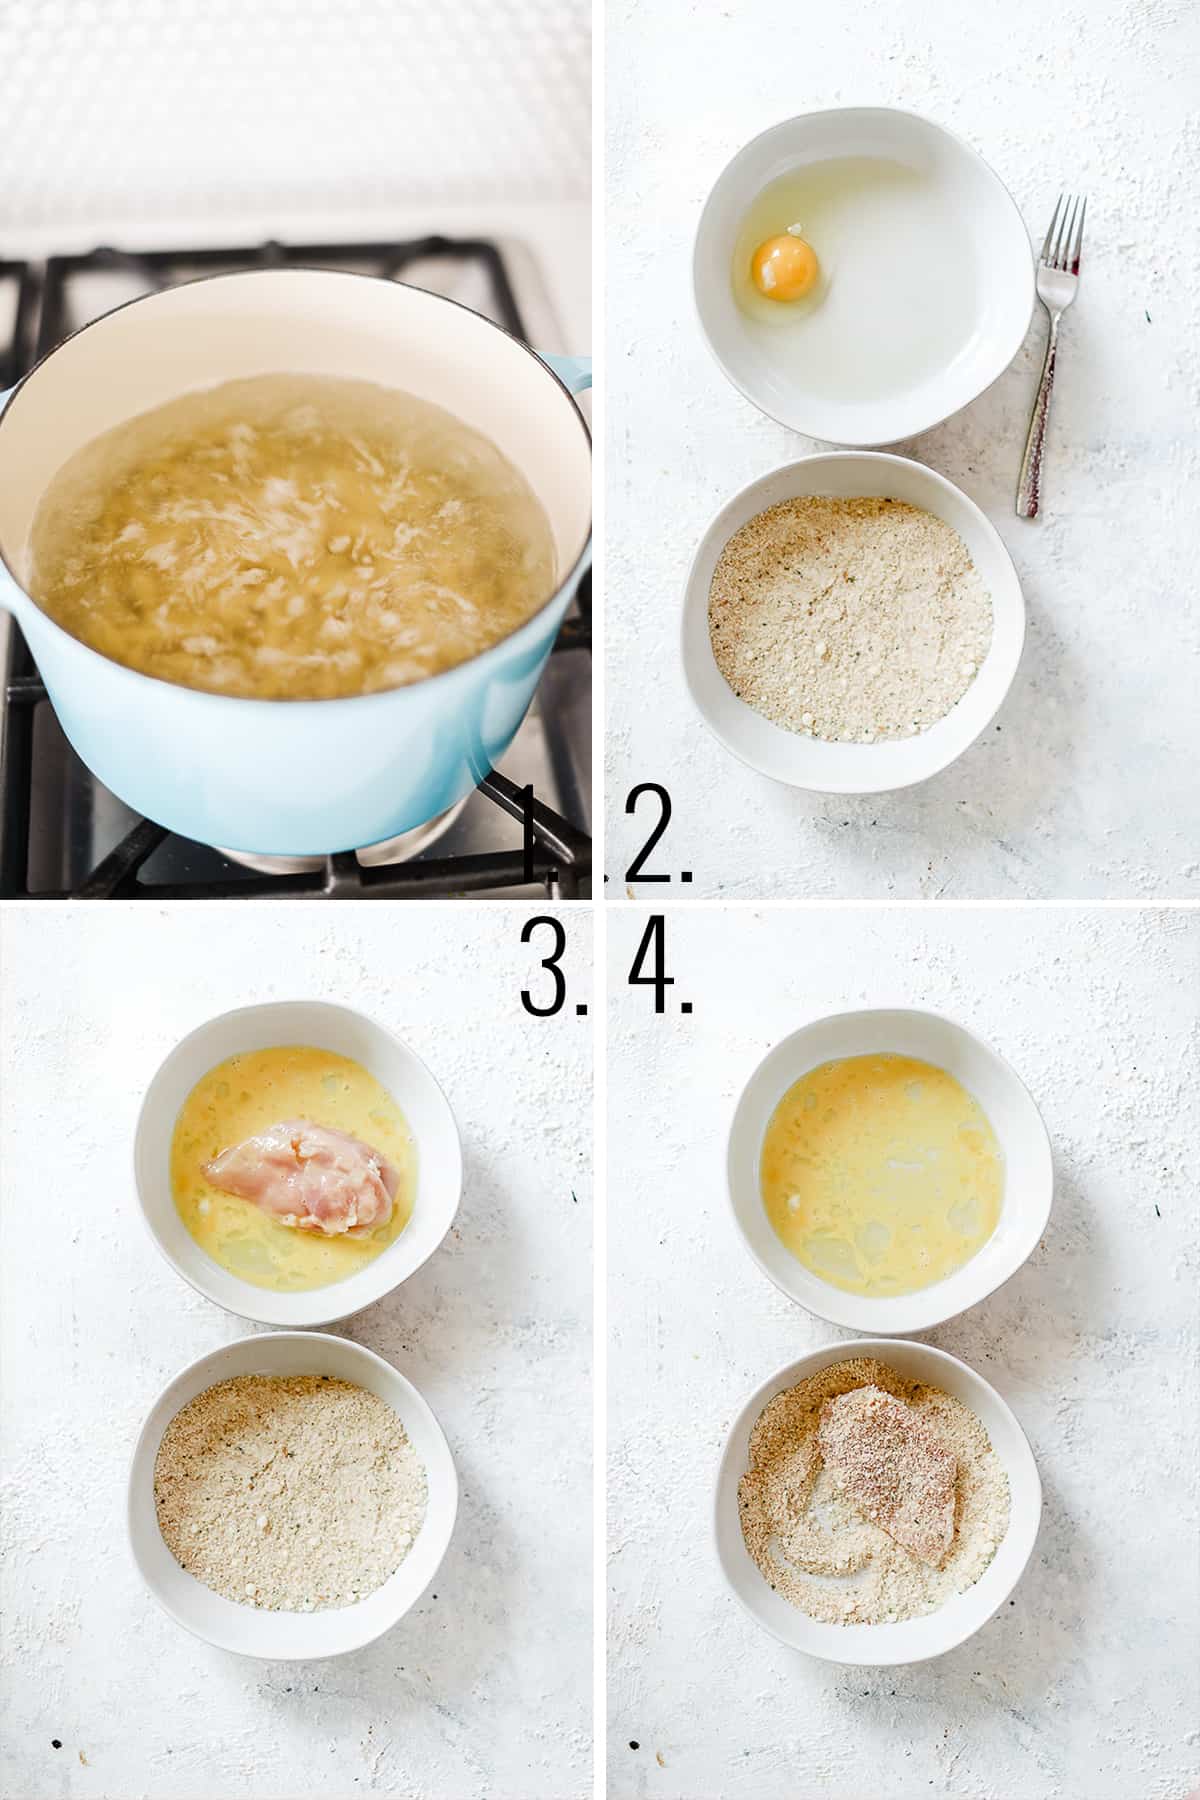 How to make breaded chicken.